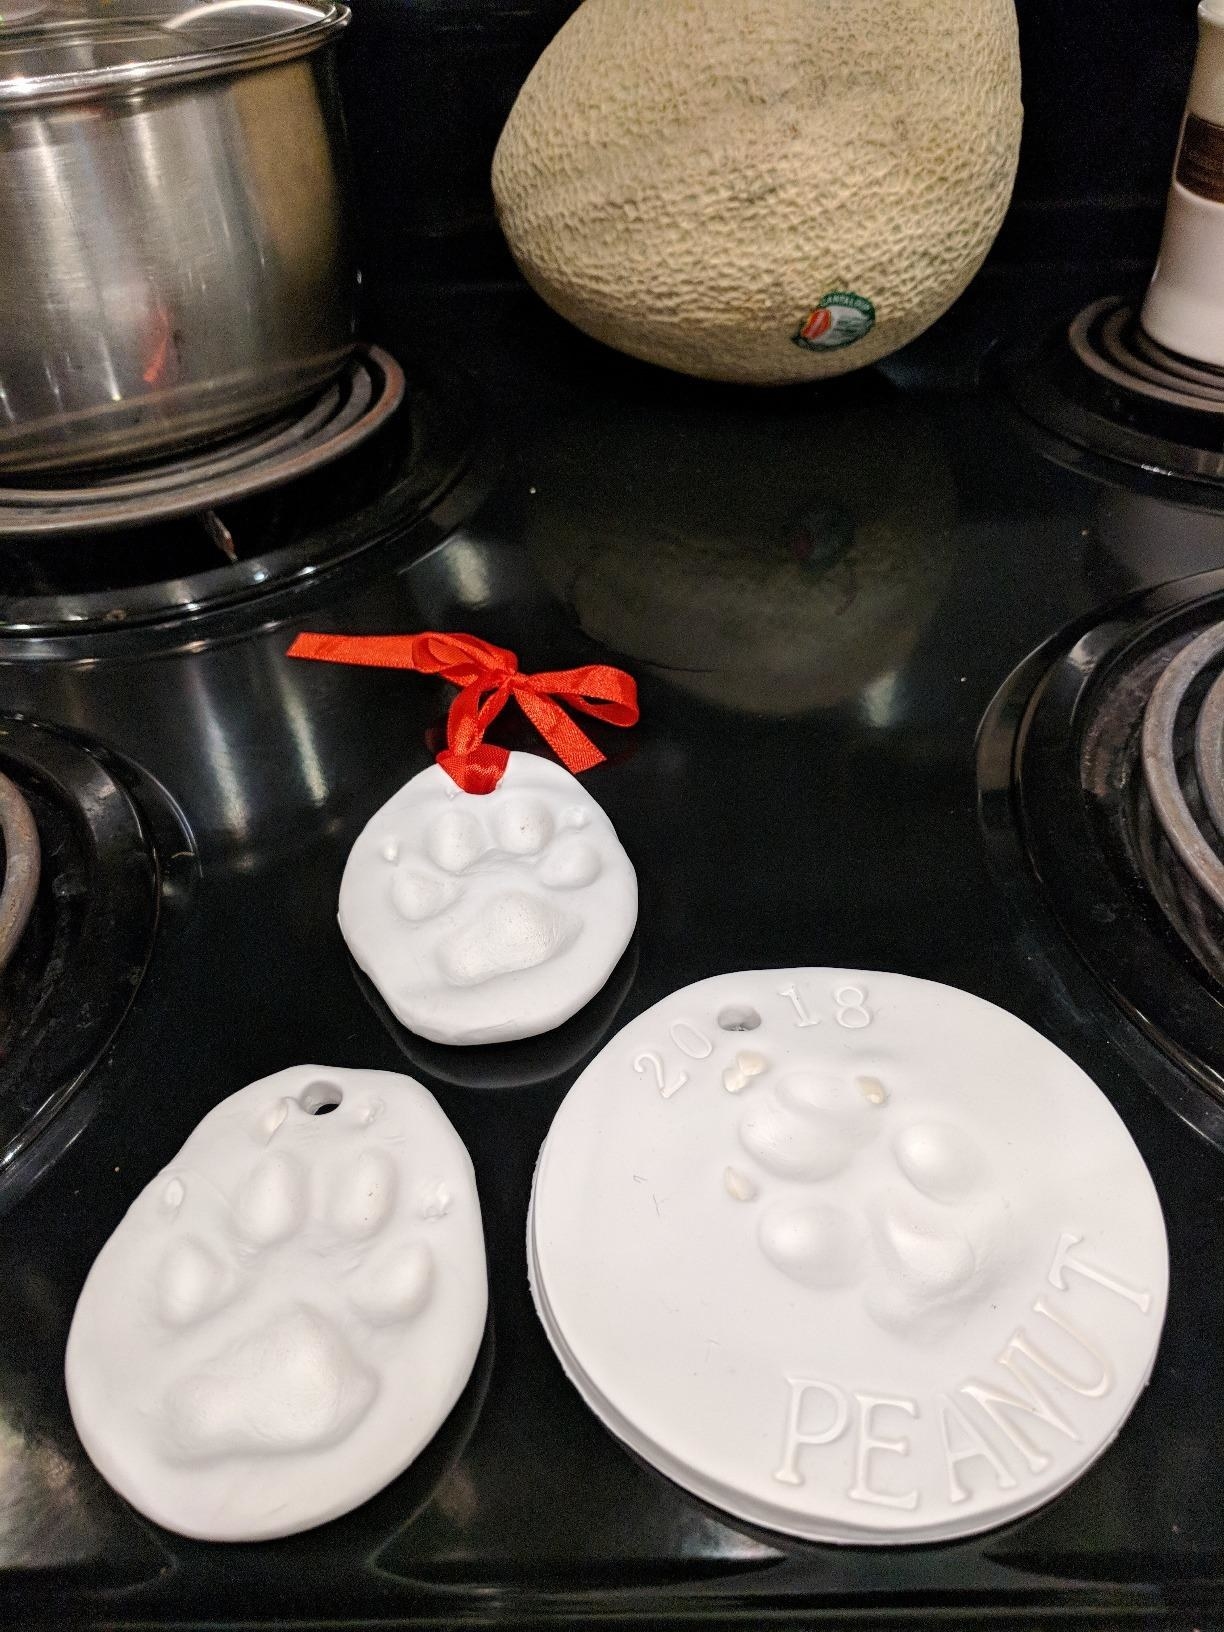 The ornaments, which are white clay and have room for a paw print, name, and ribbon loop for hanging